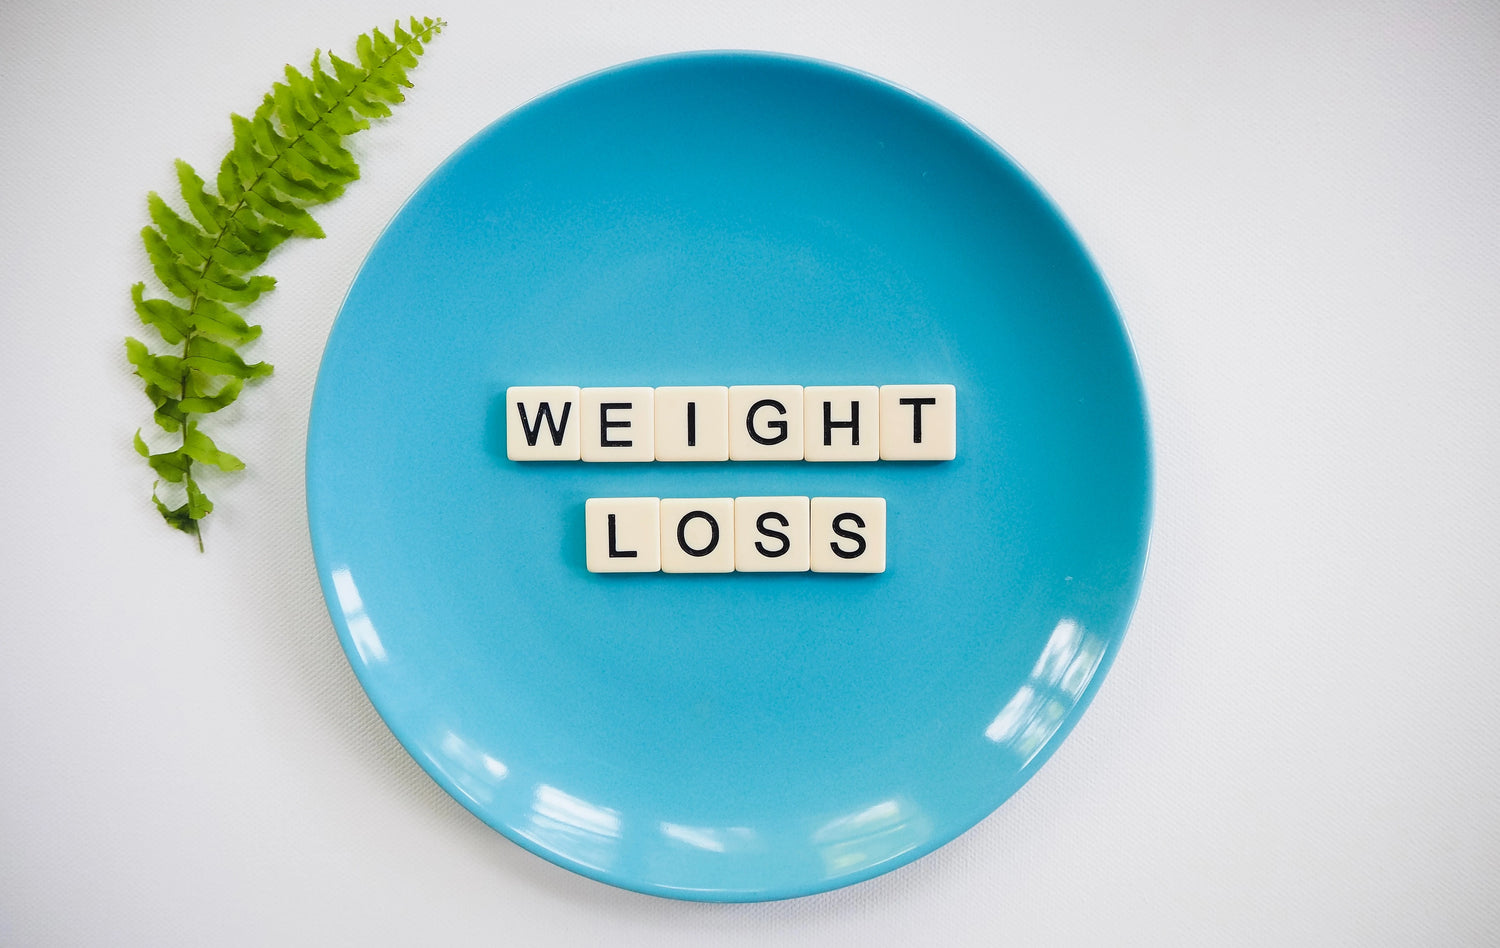 Losing Weight Fast: is it good for you?